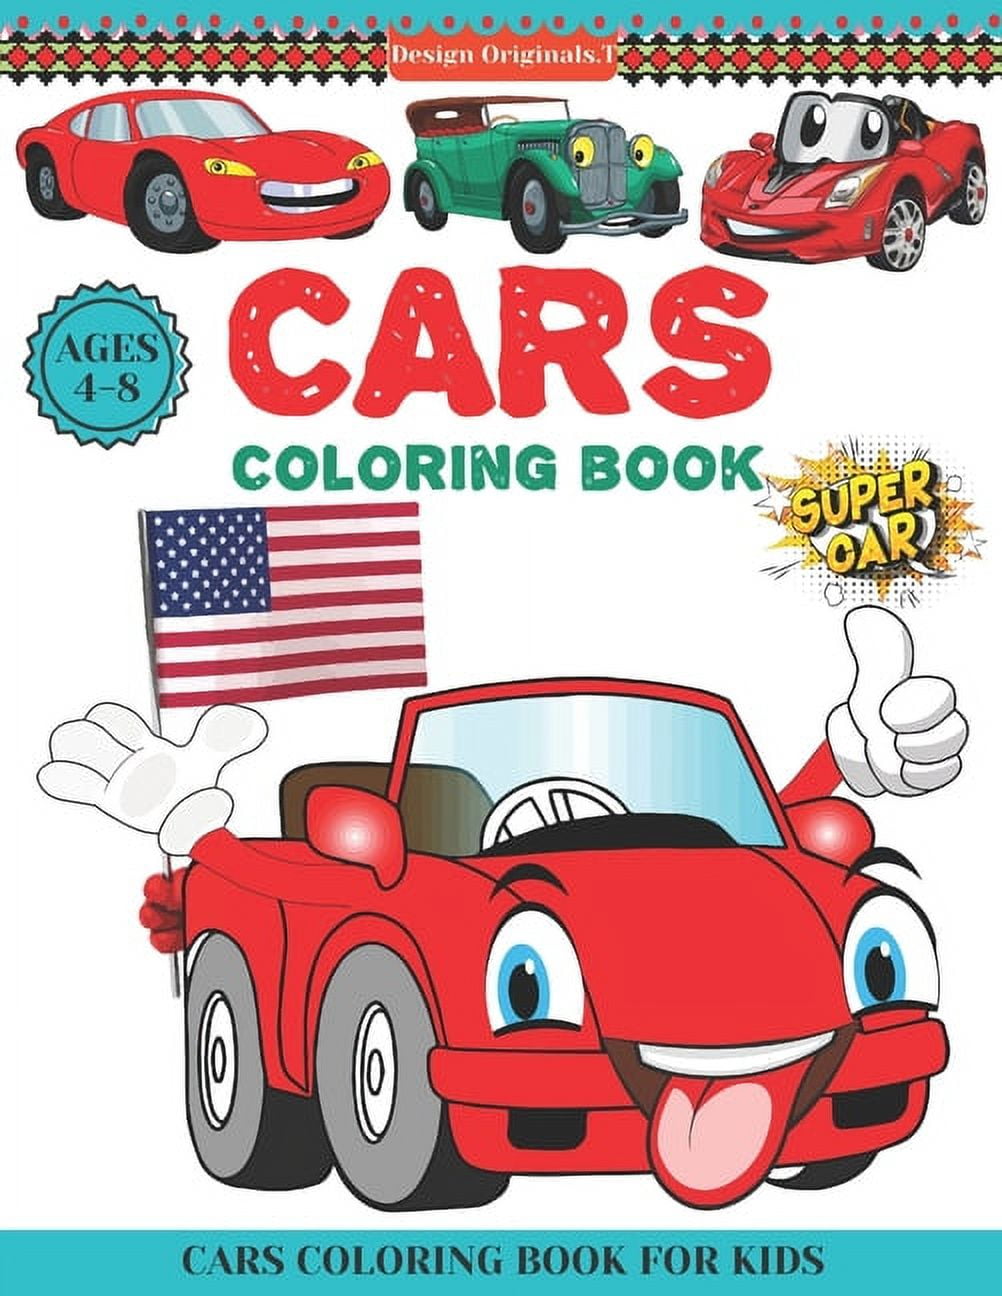 Cars Coloring Book Ages 4-8: Beautiful Cars & Vehicles Coloring Book Ages 4-8 & 8-12 Kids and Toddlers Preschoolers Boys & Girls (Super Coloring Book) [Book]